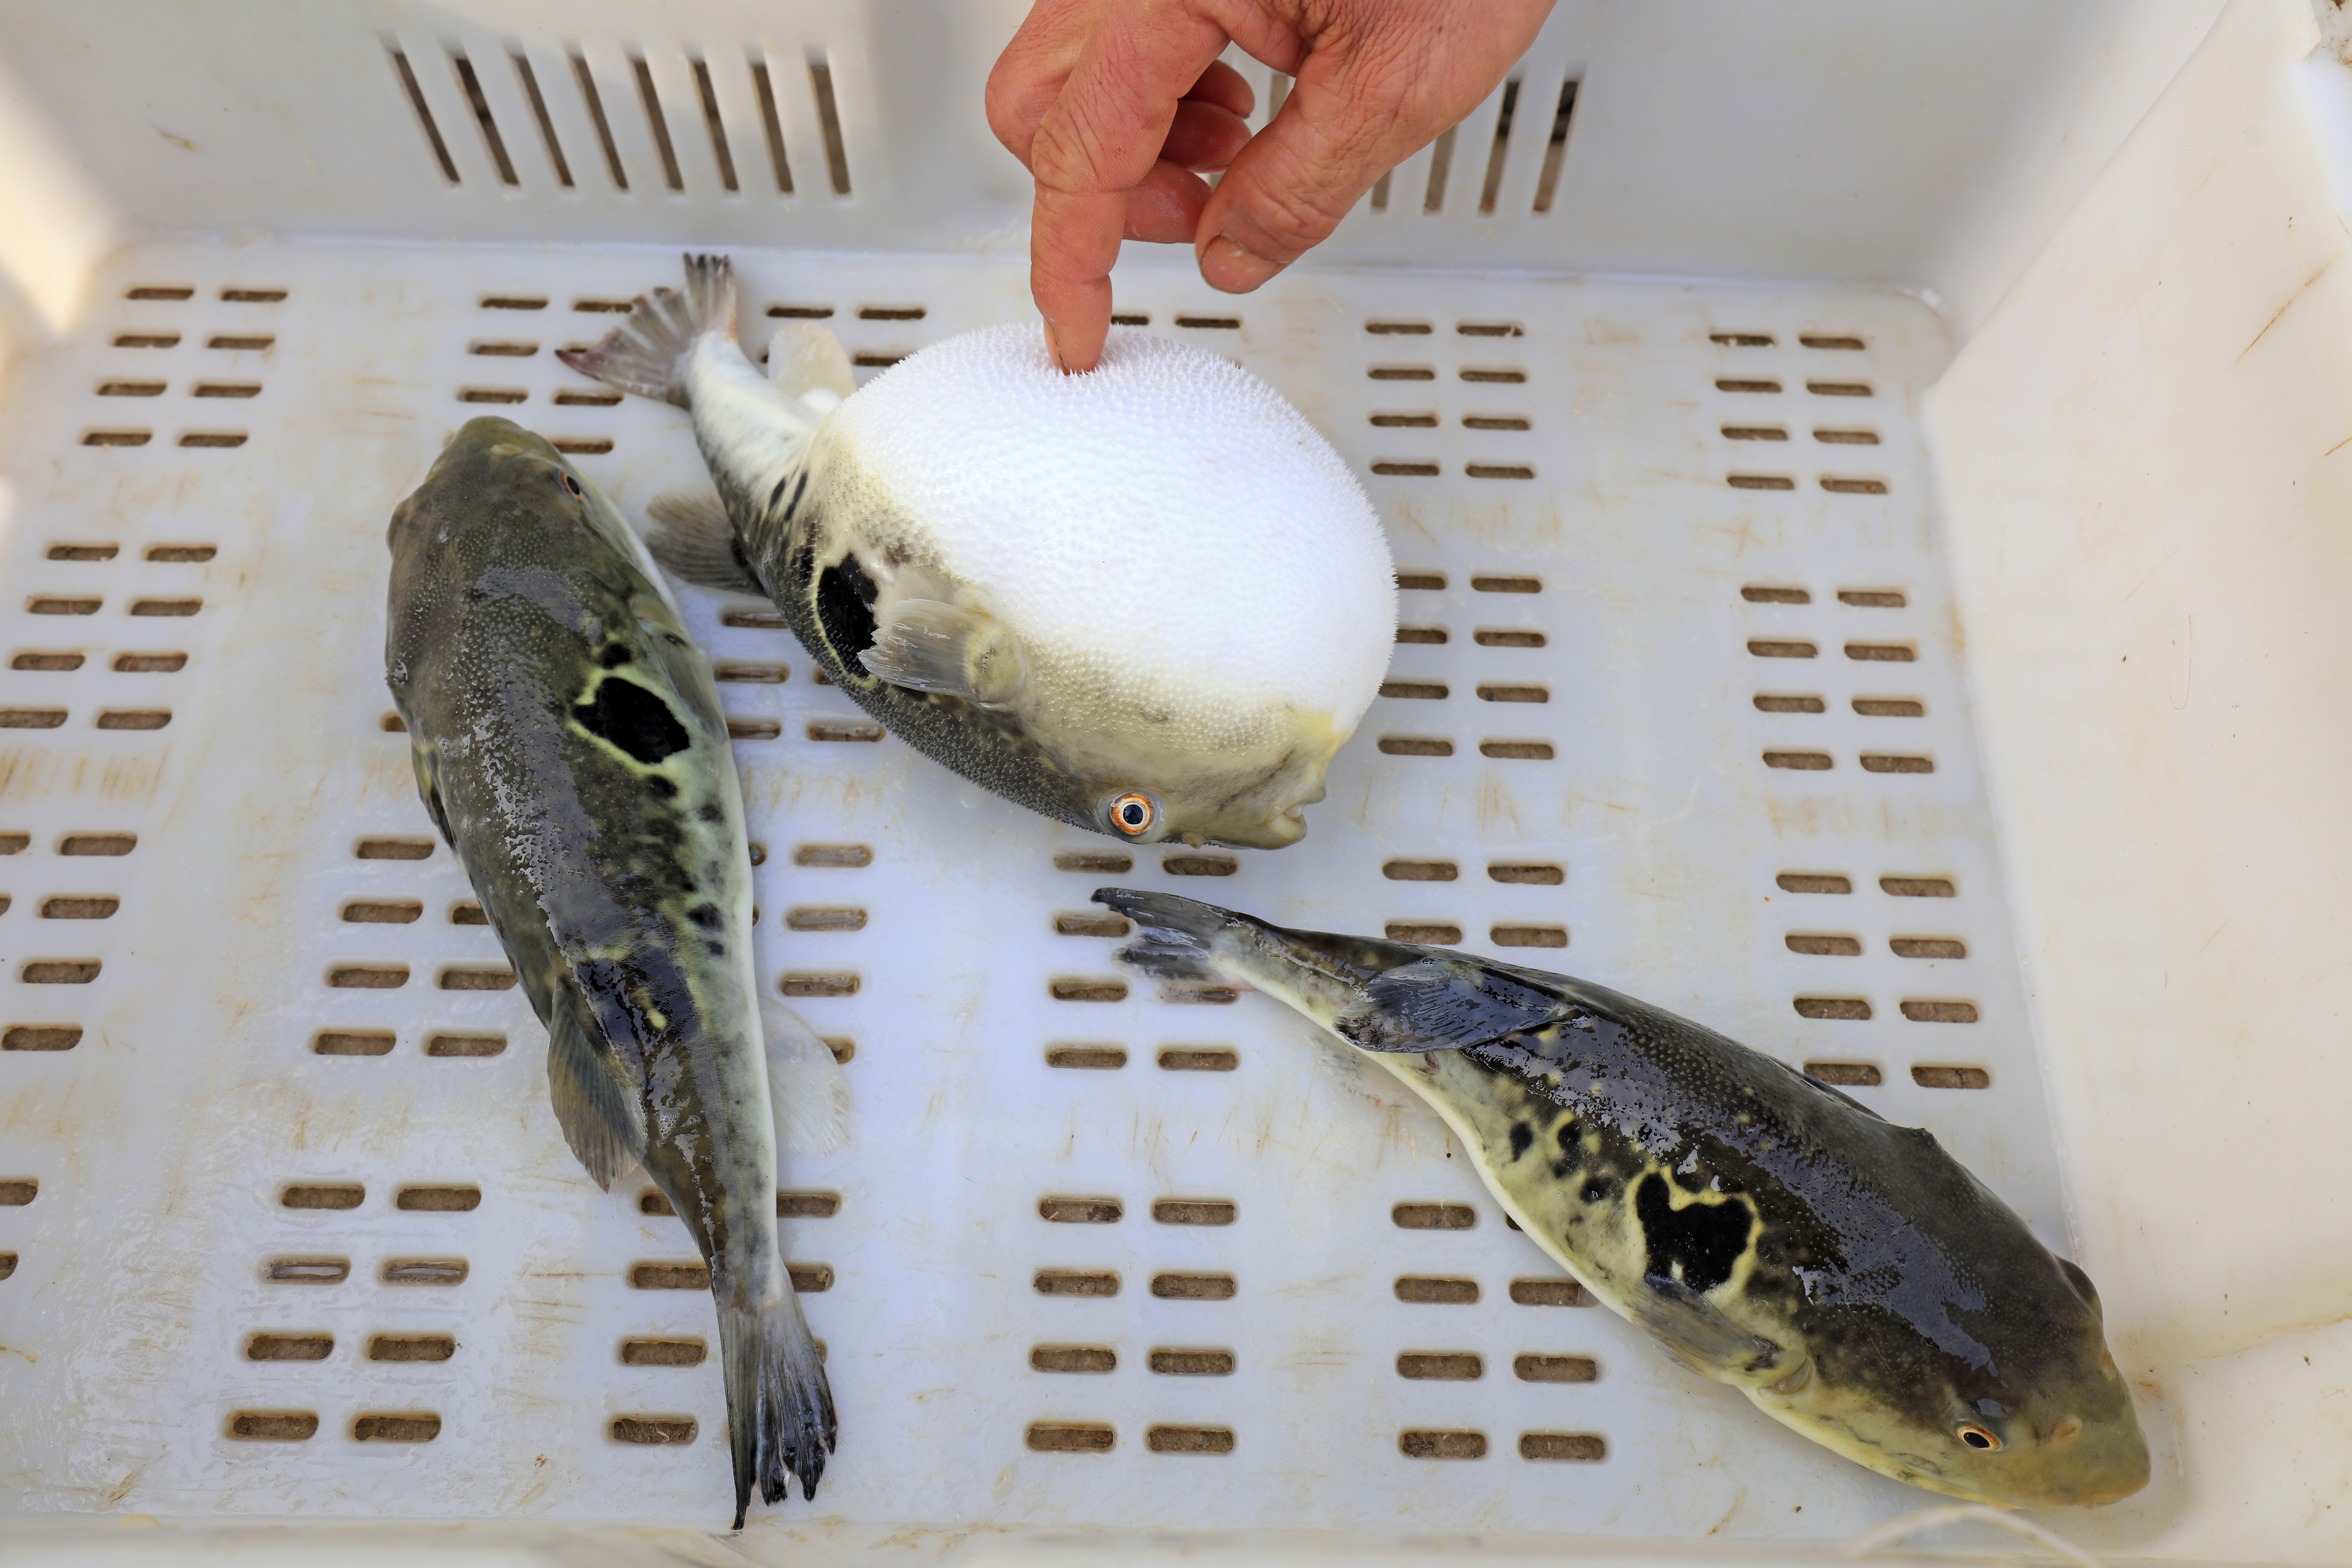 Three takifugu pufferfish caught by fishermen, the species of fish used in the Japanese food fugu.